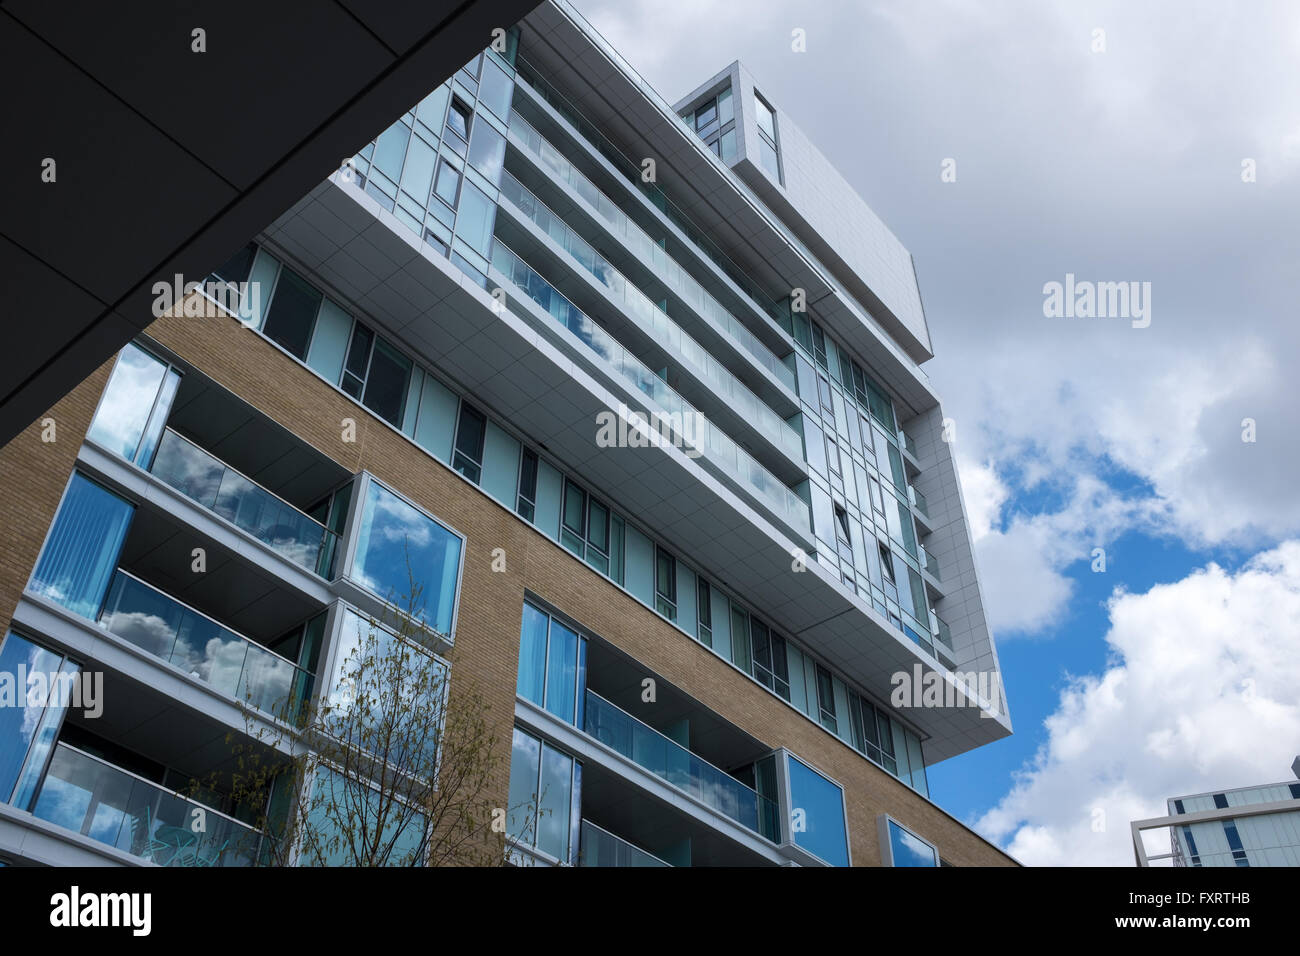 The Filaments residential apartments, Wandsworth Putney London Stock Photo